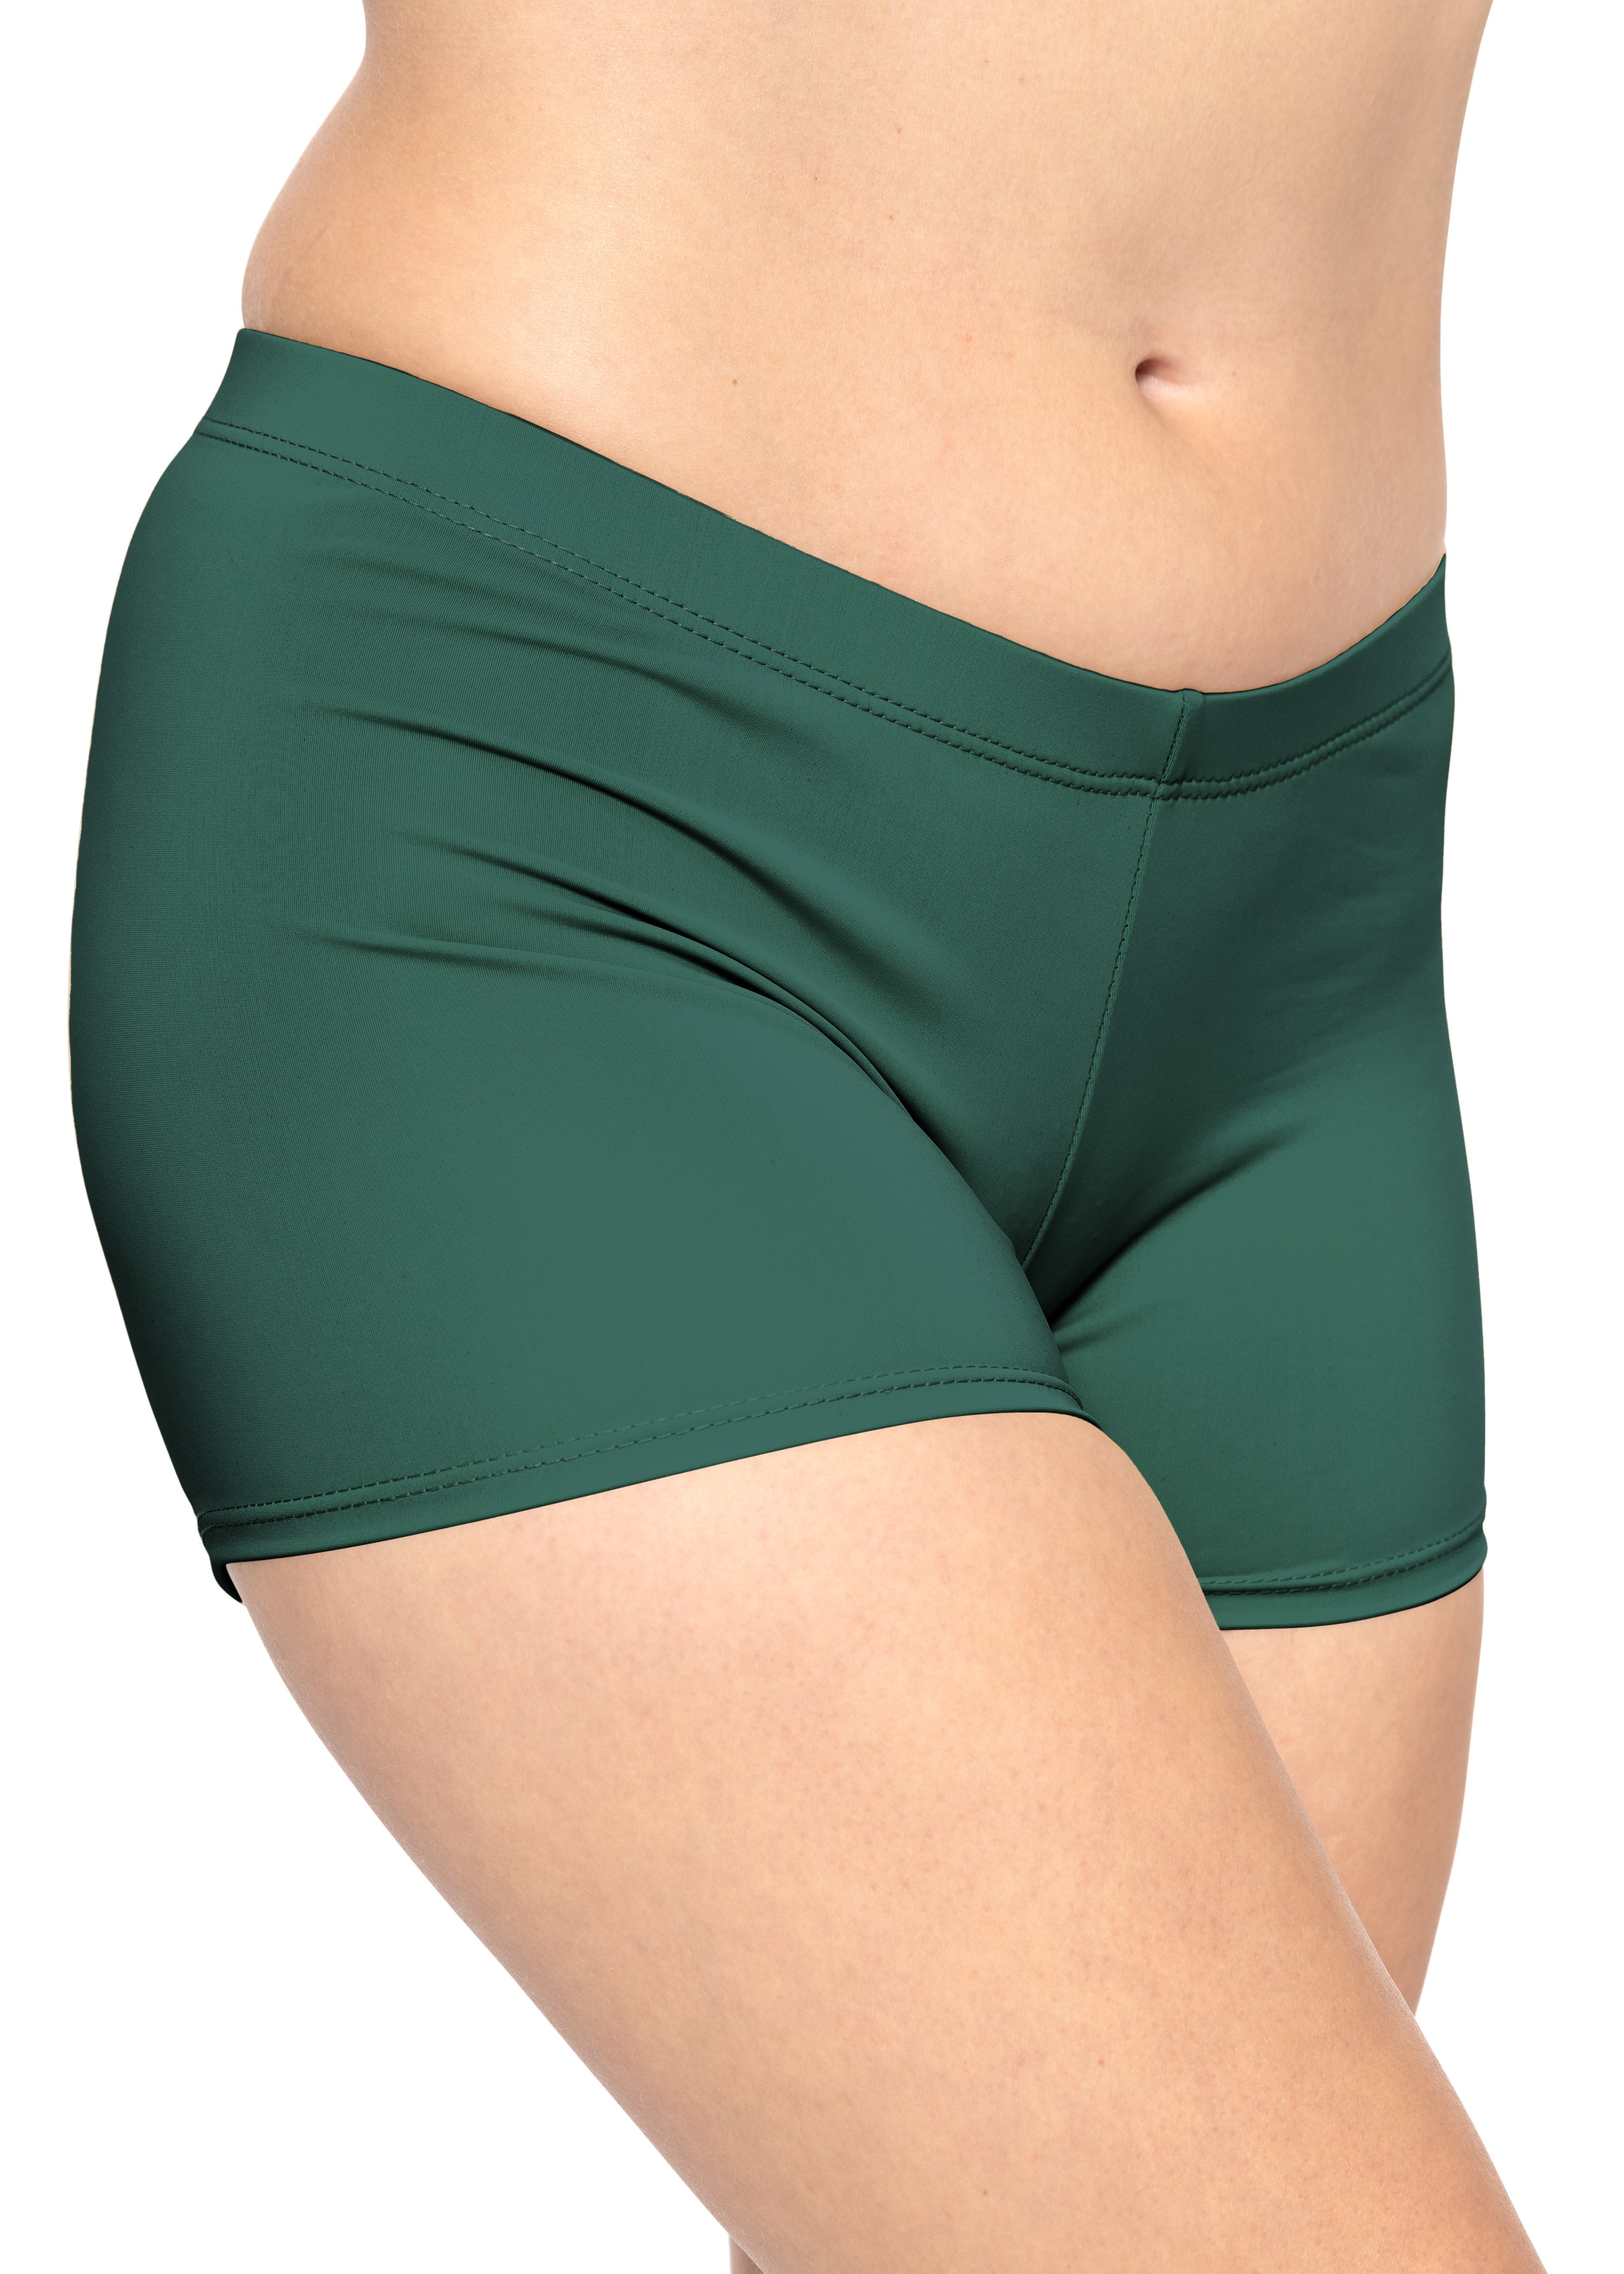 STRETCH IS COMFORT Women's Plus Size Nylon/Spandex Booty Shorts | X-Large -  3X